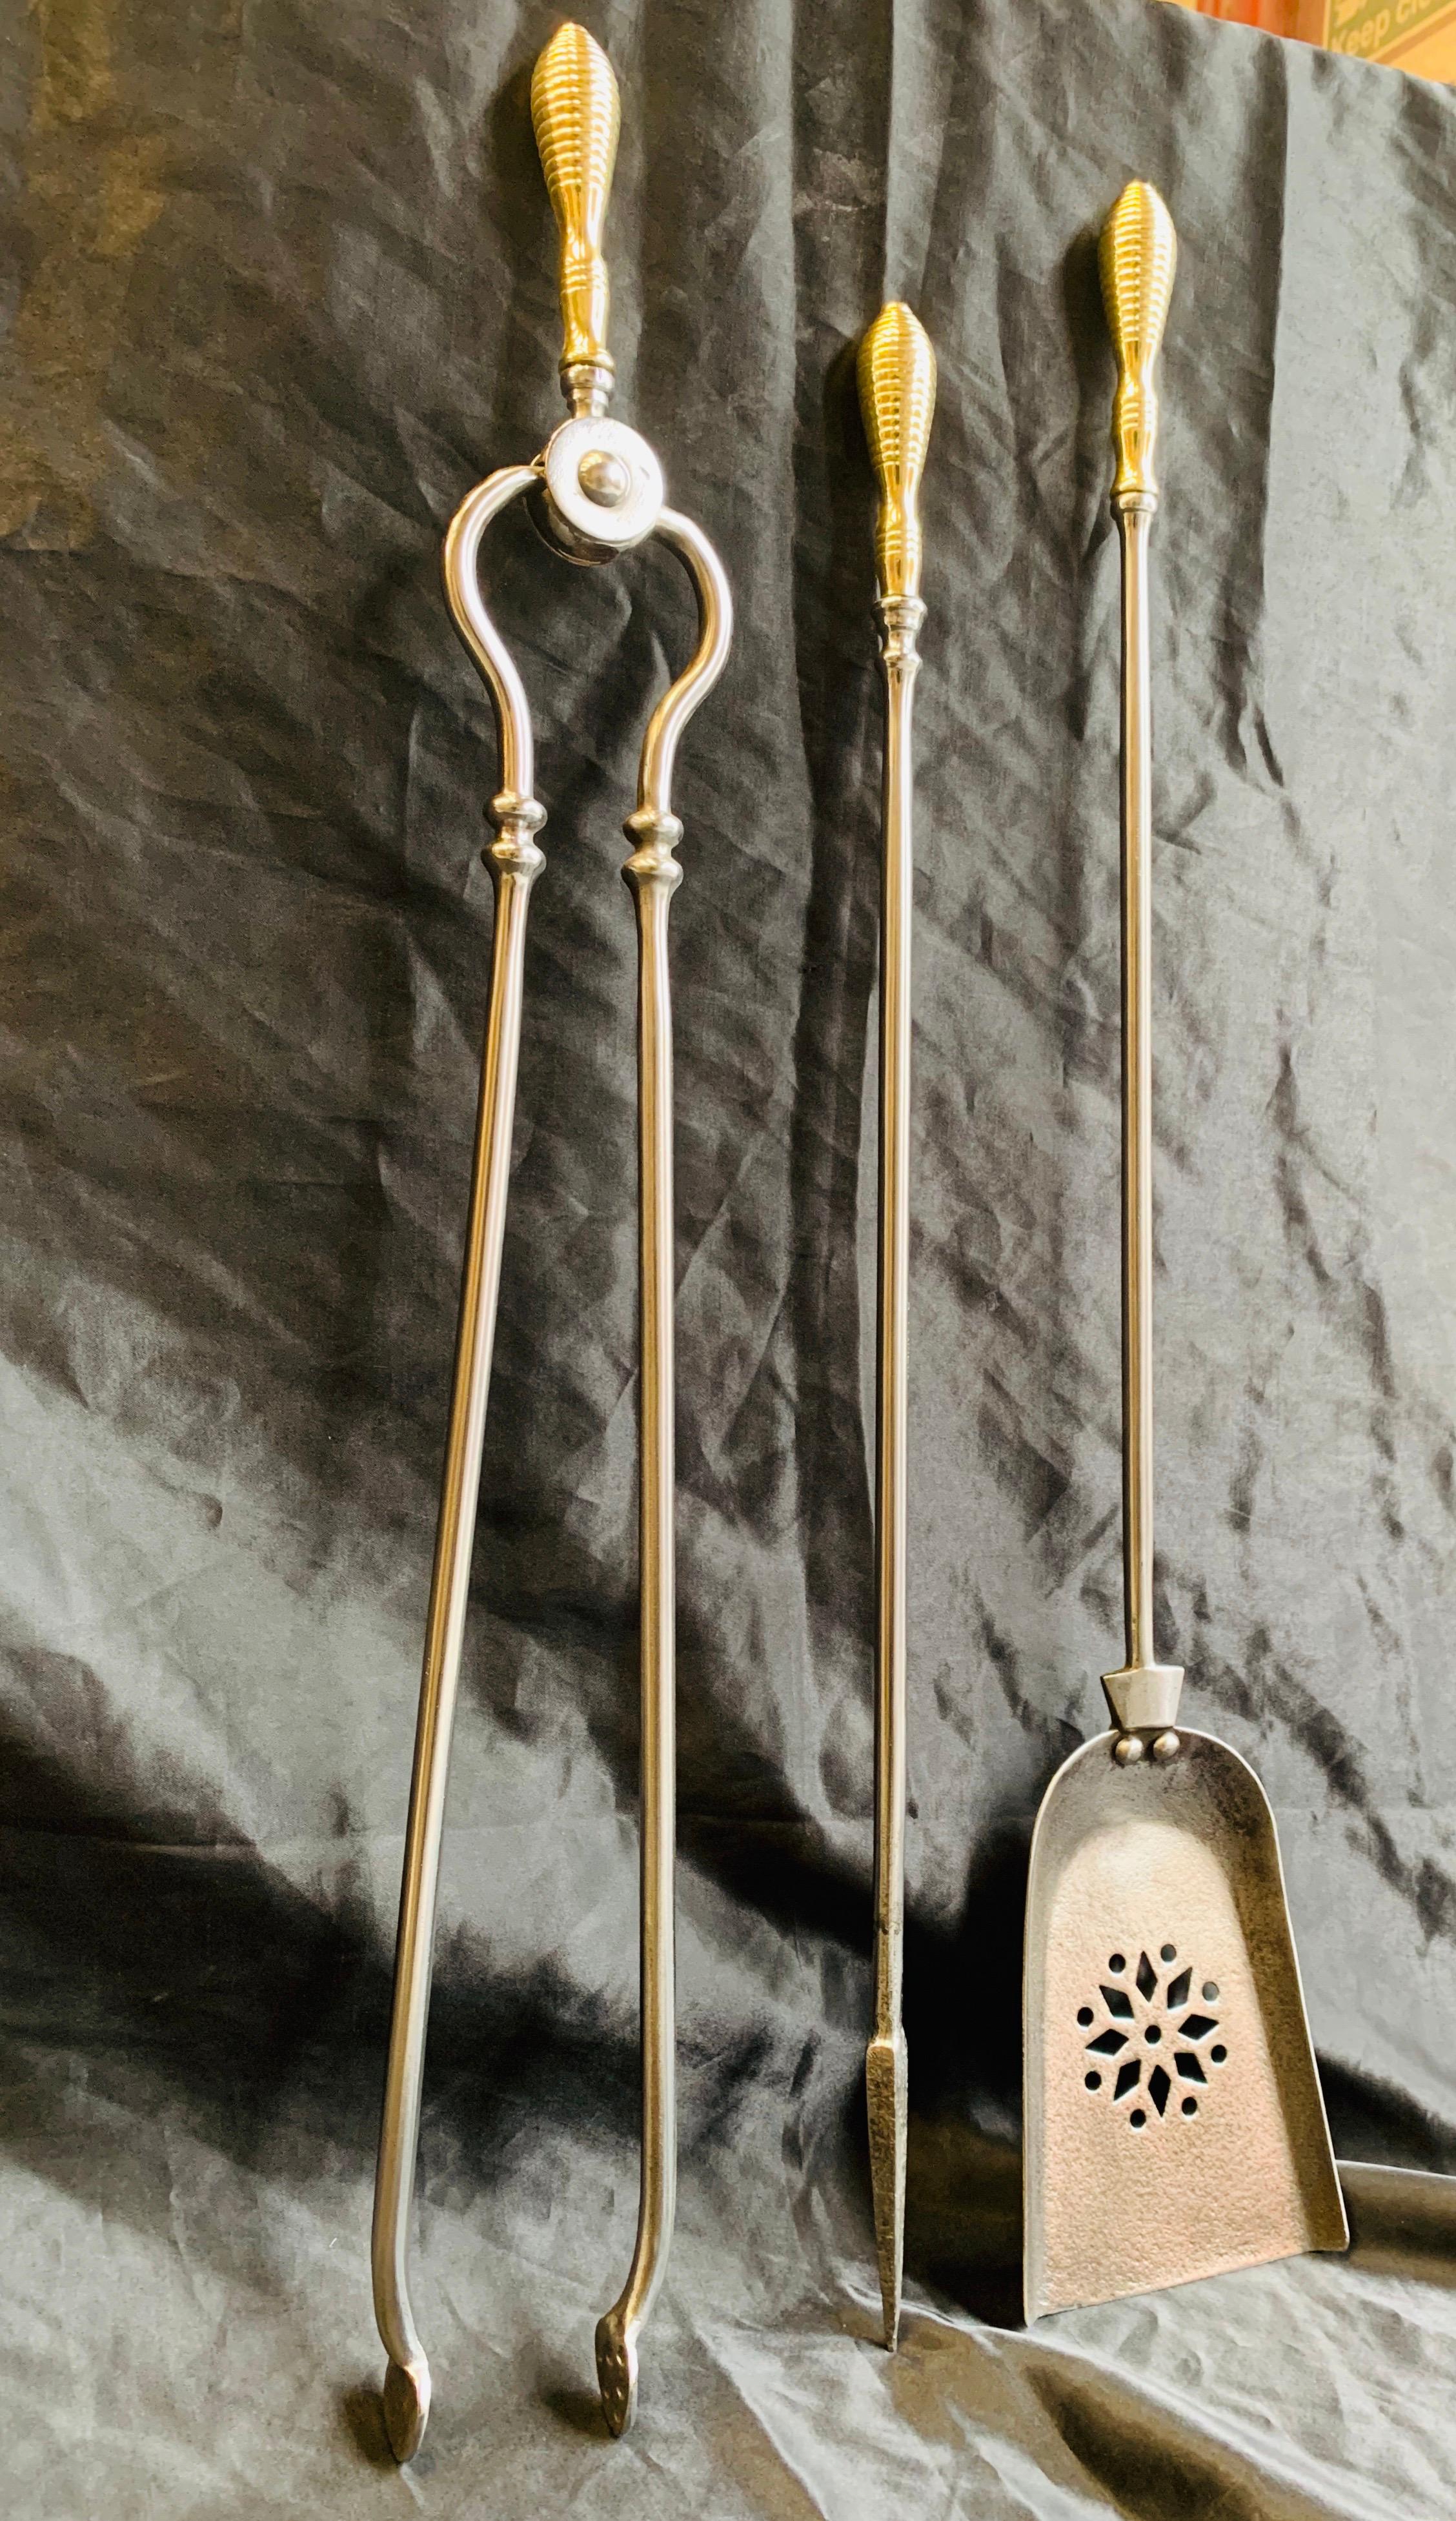 A simple set of late 19th century Victorian fire tools with attractive polished brass beehive handles and polished steel shafts, comprising of a poker, shovel with pierced blade and tongs.

English, circa 1900.